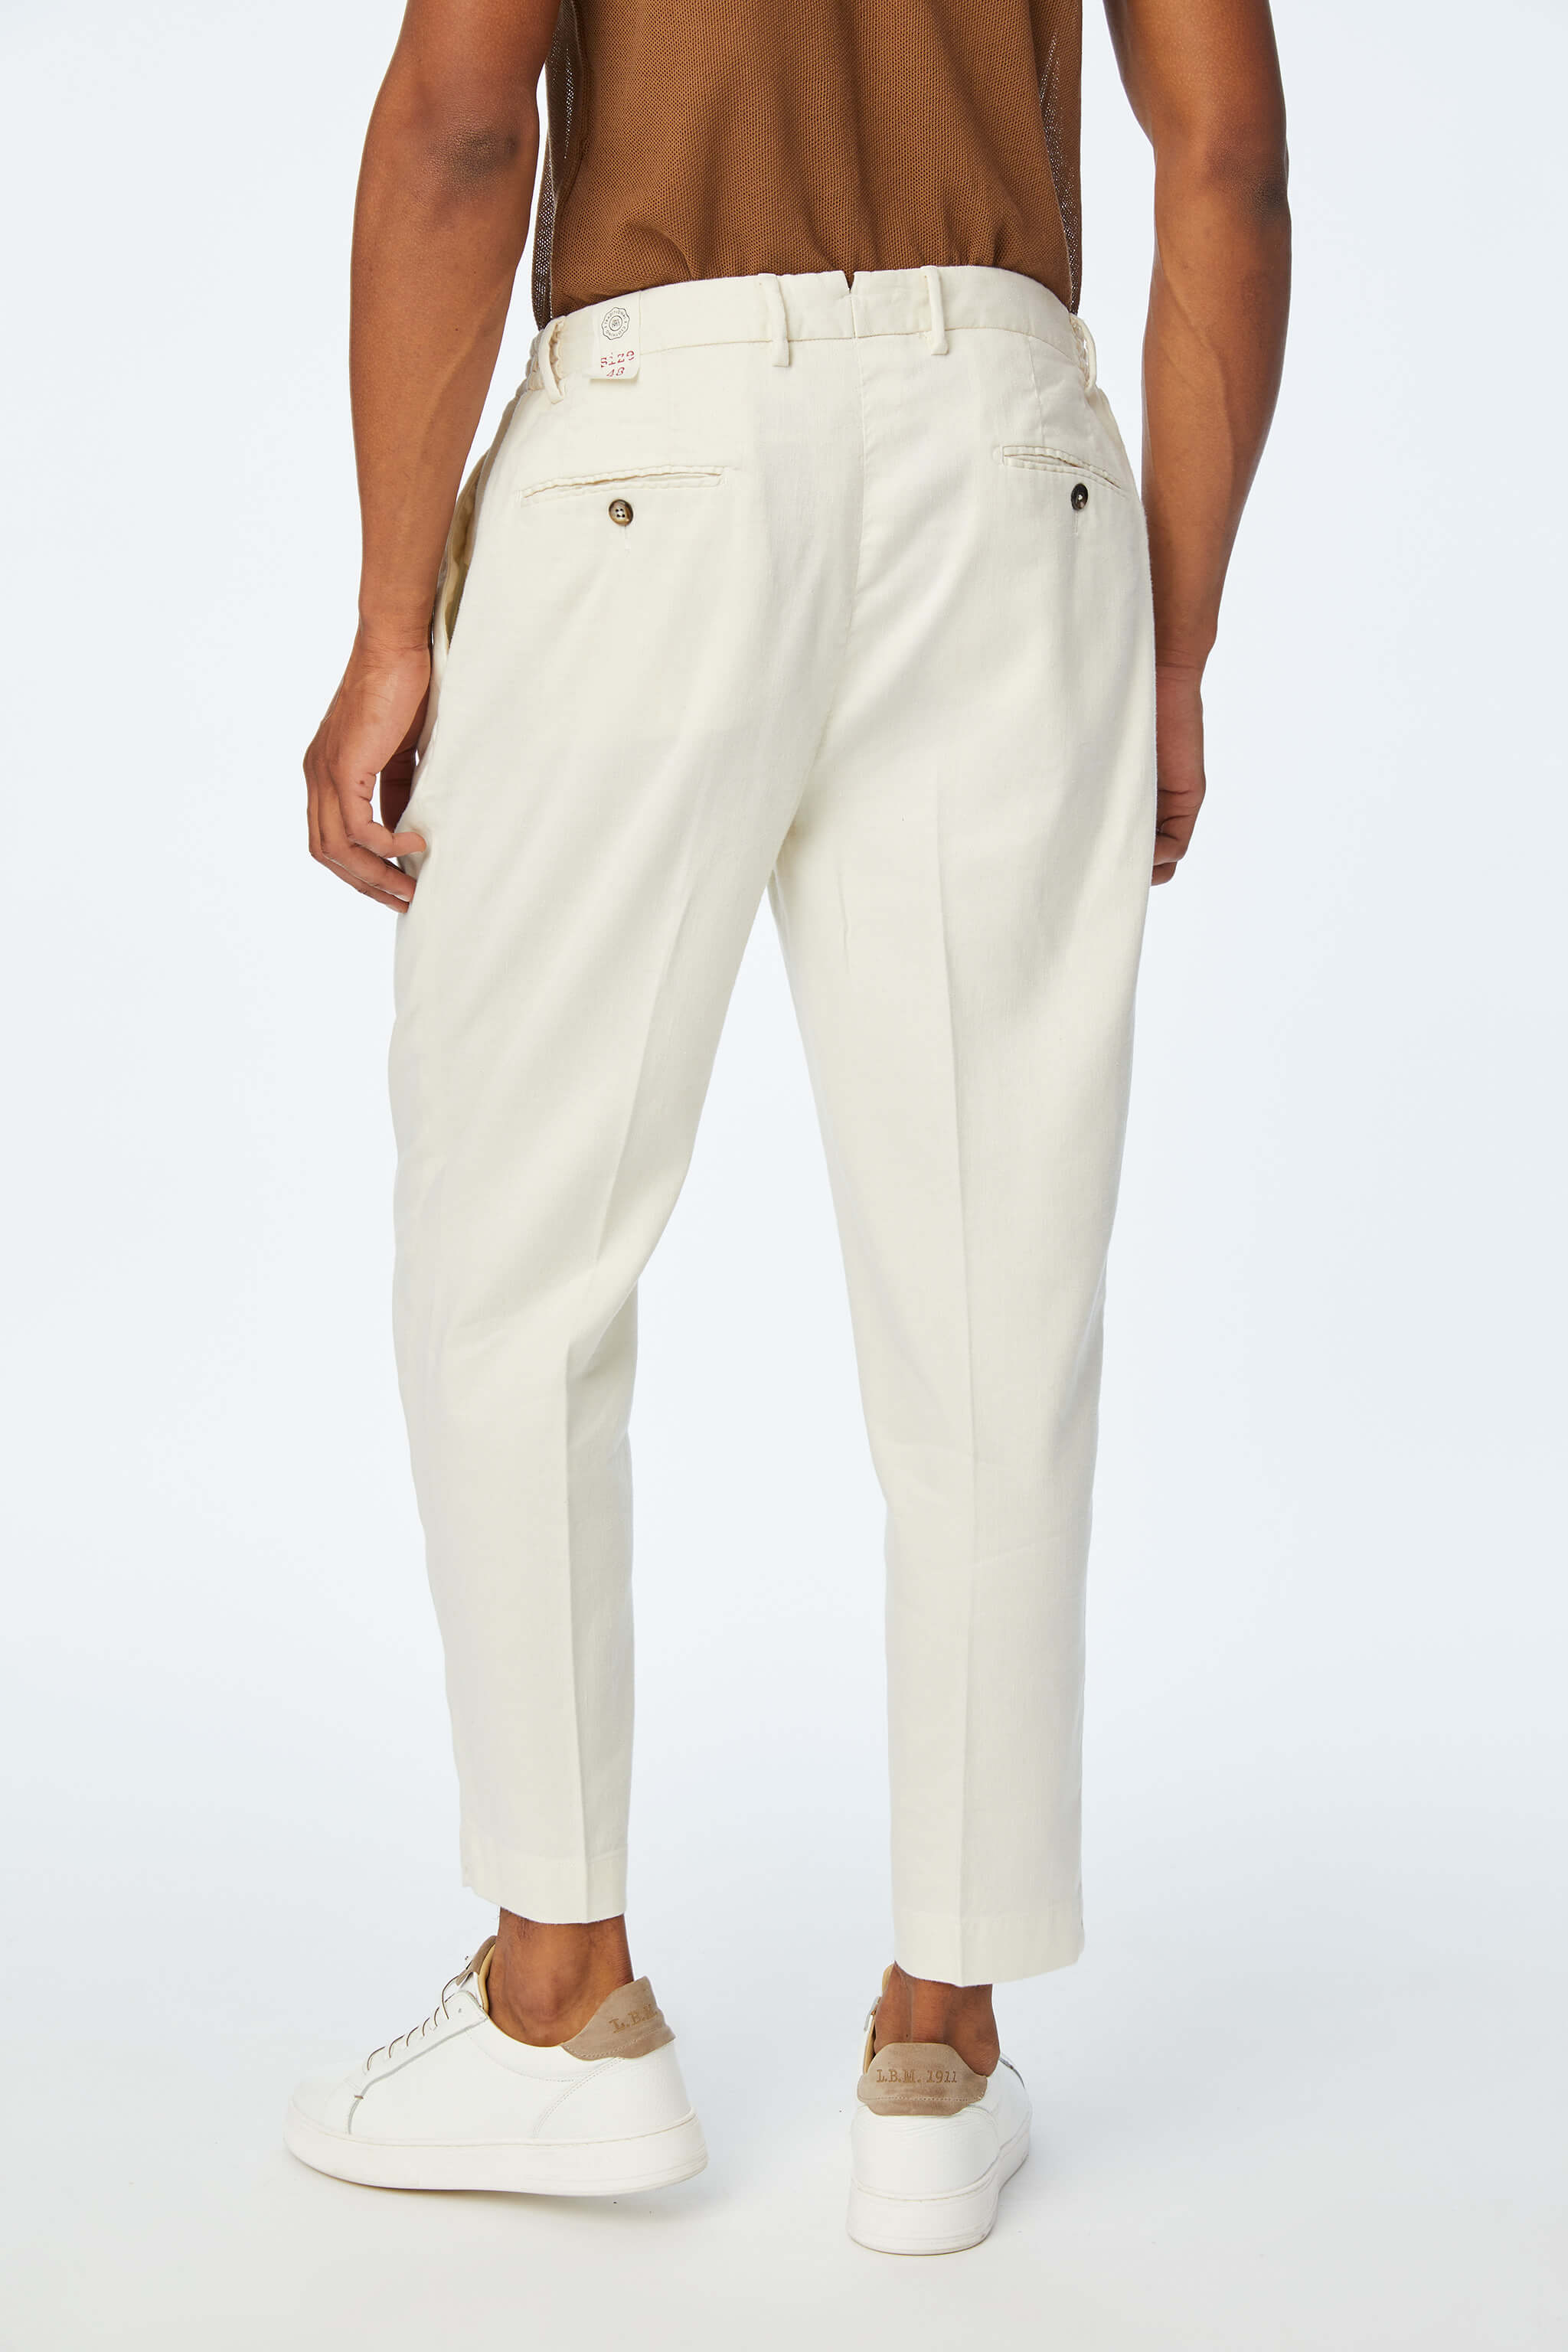 Garment-dyed CLARENCE pants in White